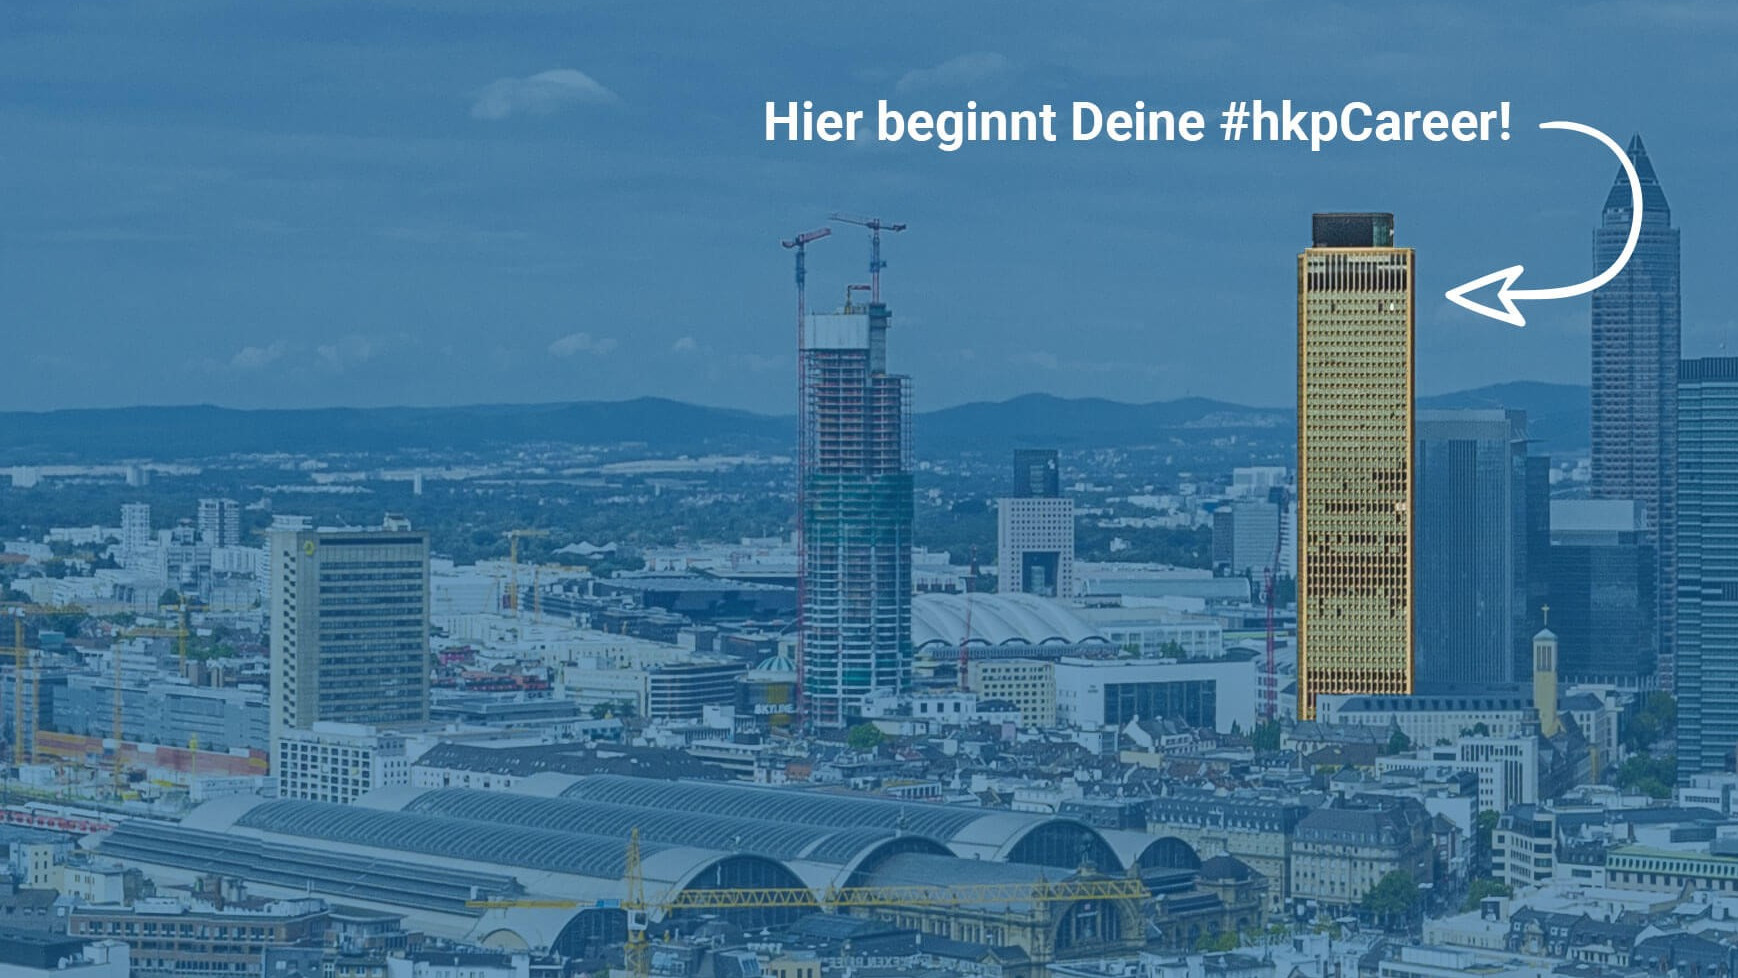 Consulting Experience Live: das hkp/// group Case Study Event